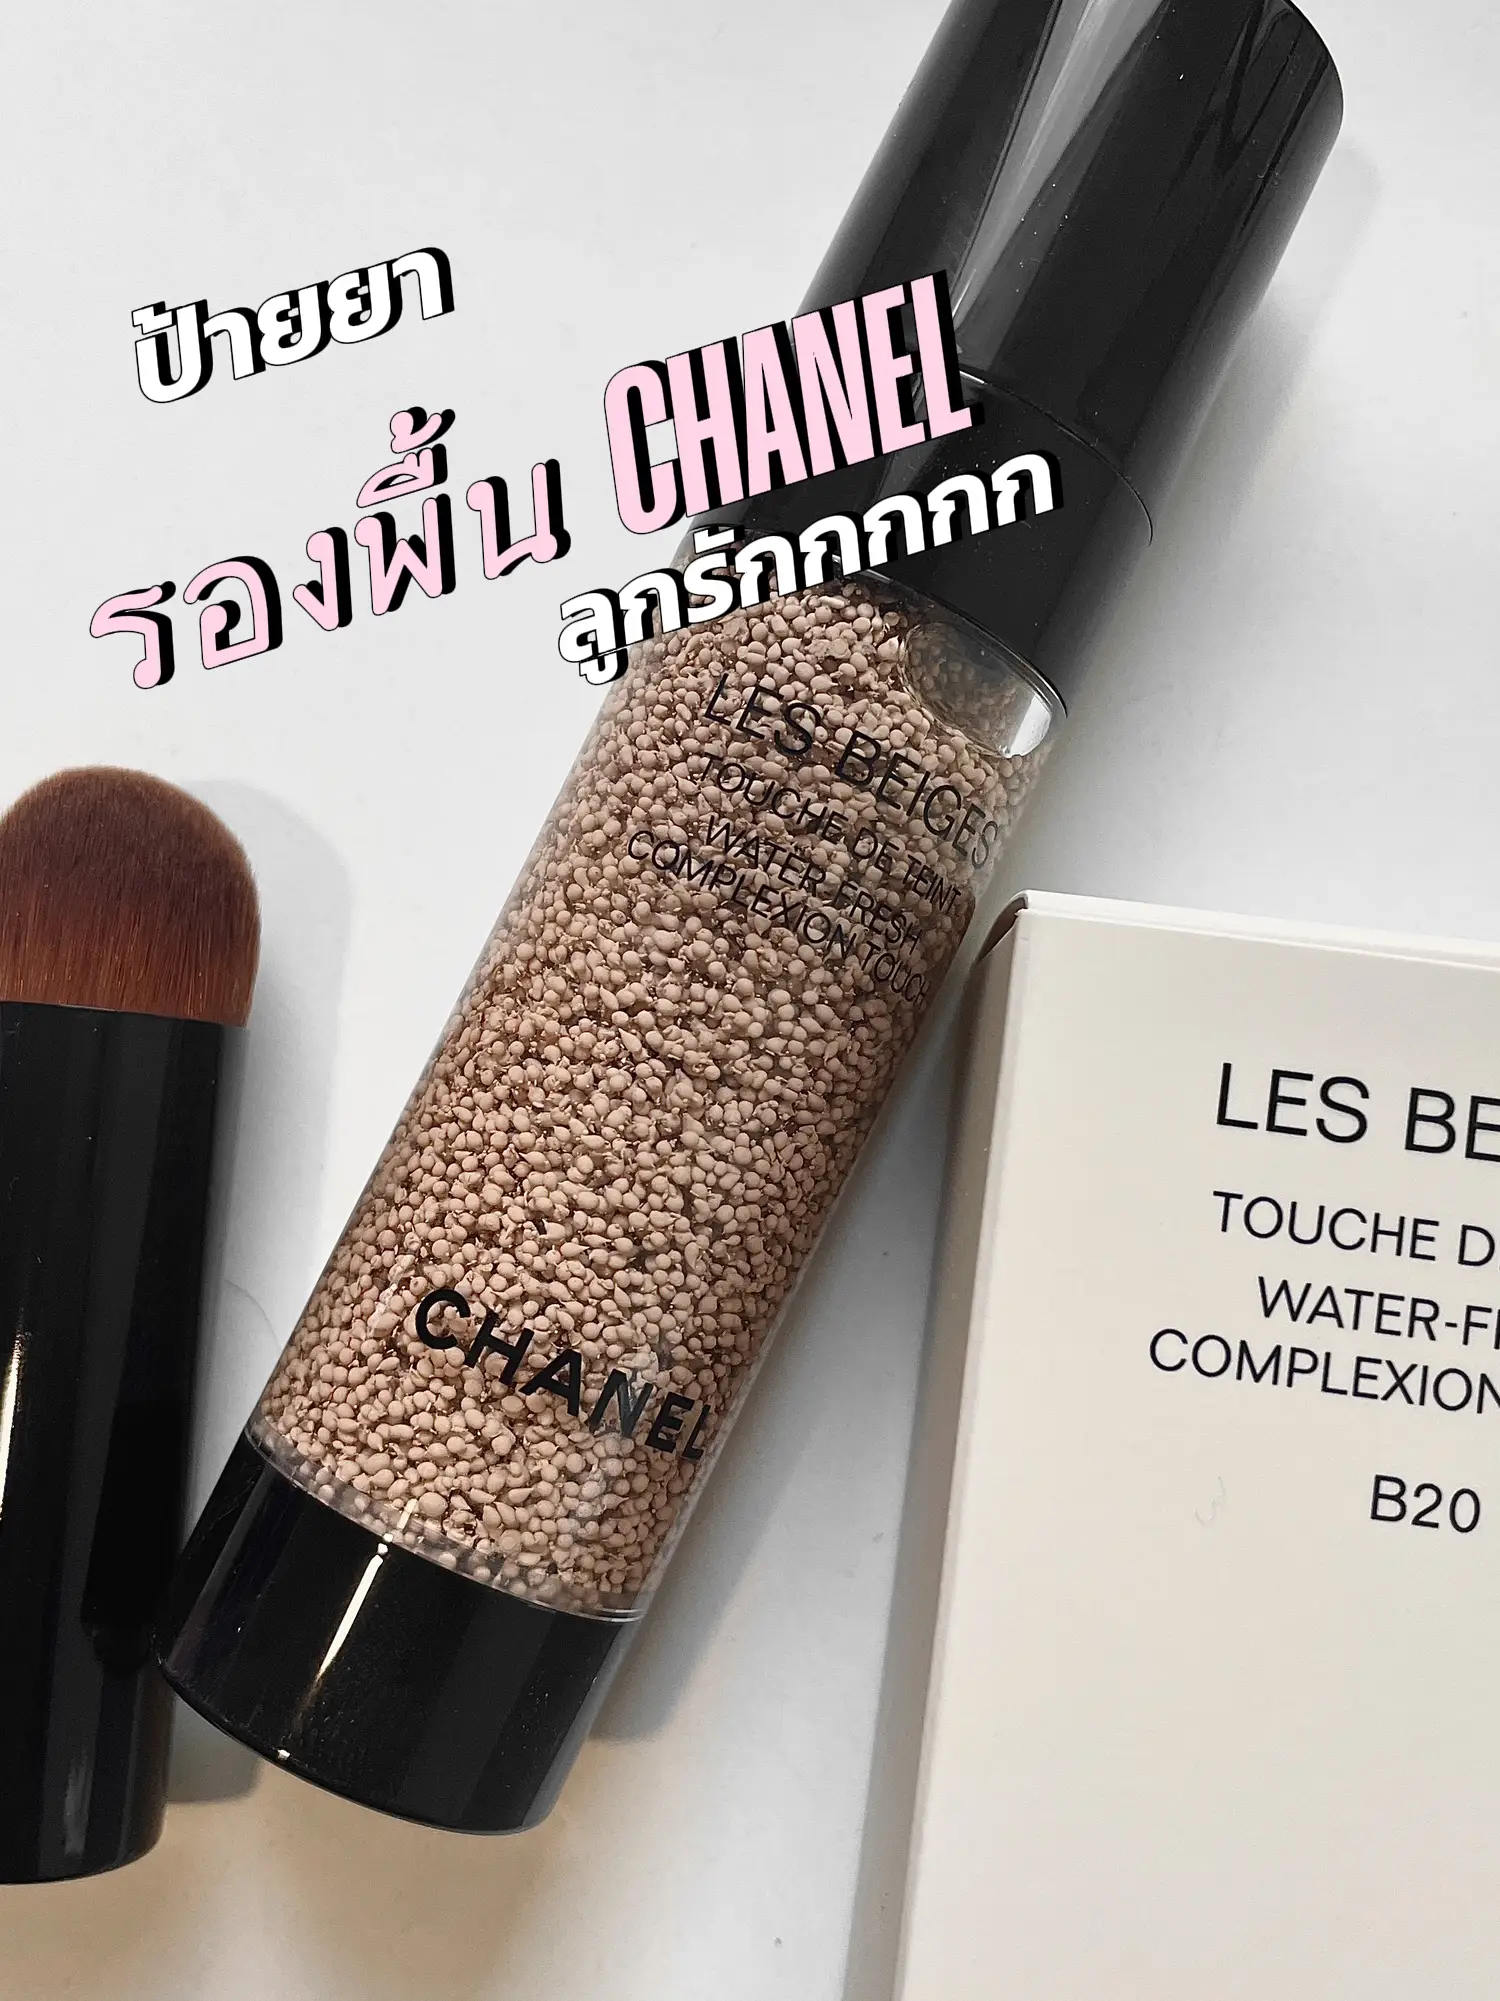 The truth about the Chanel LES BEIGES skin tint, Gallery posted by Fahira  Ornella